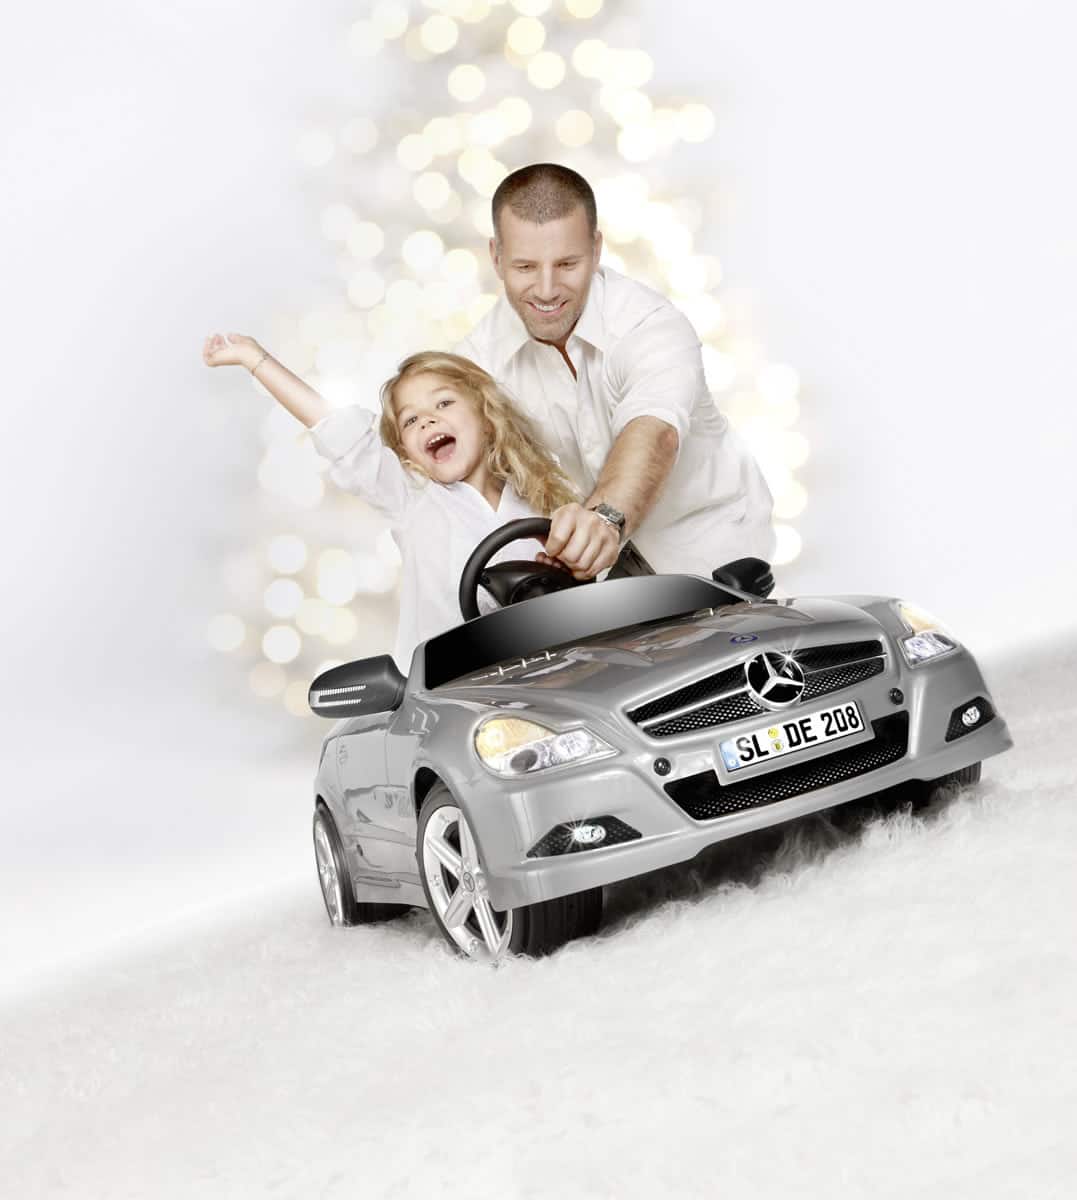 2011 Mercedes-Benz Christmas Gifts